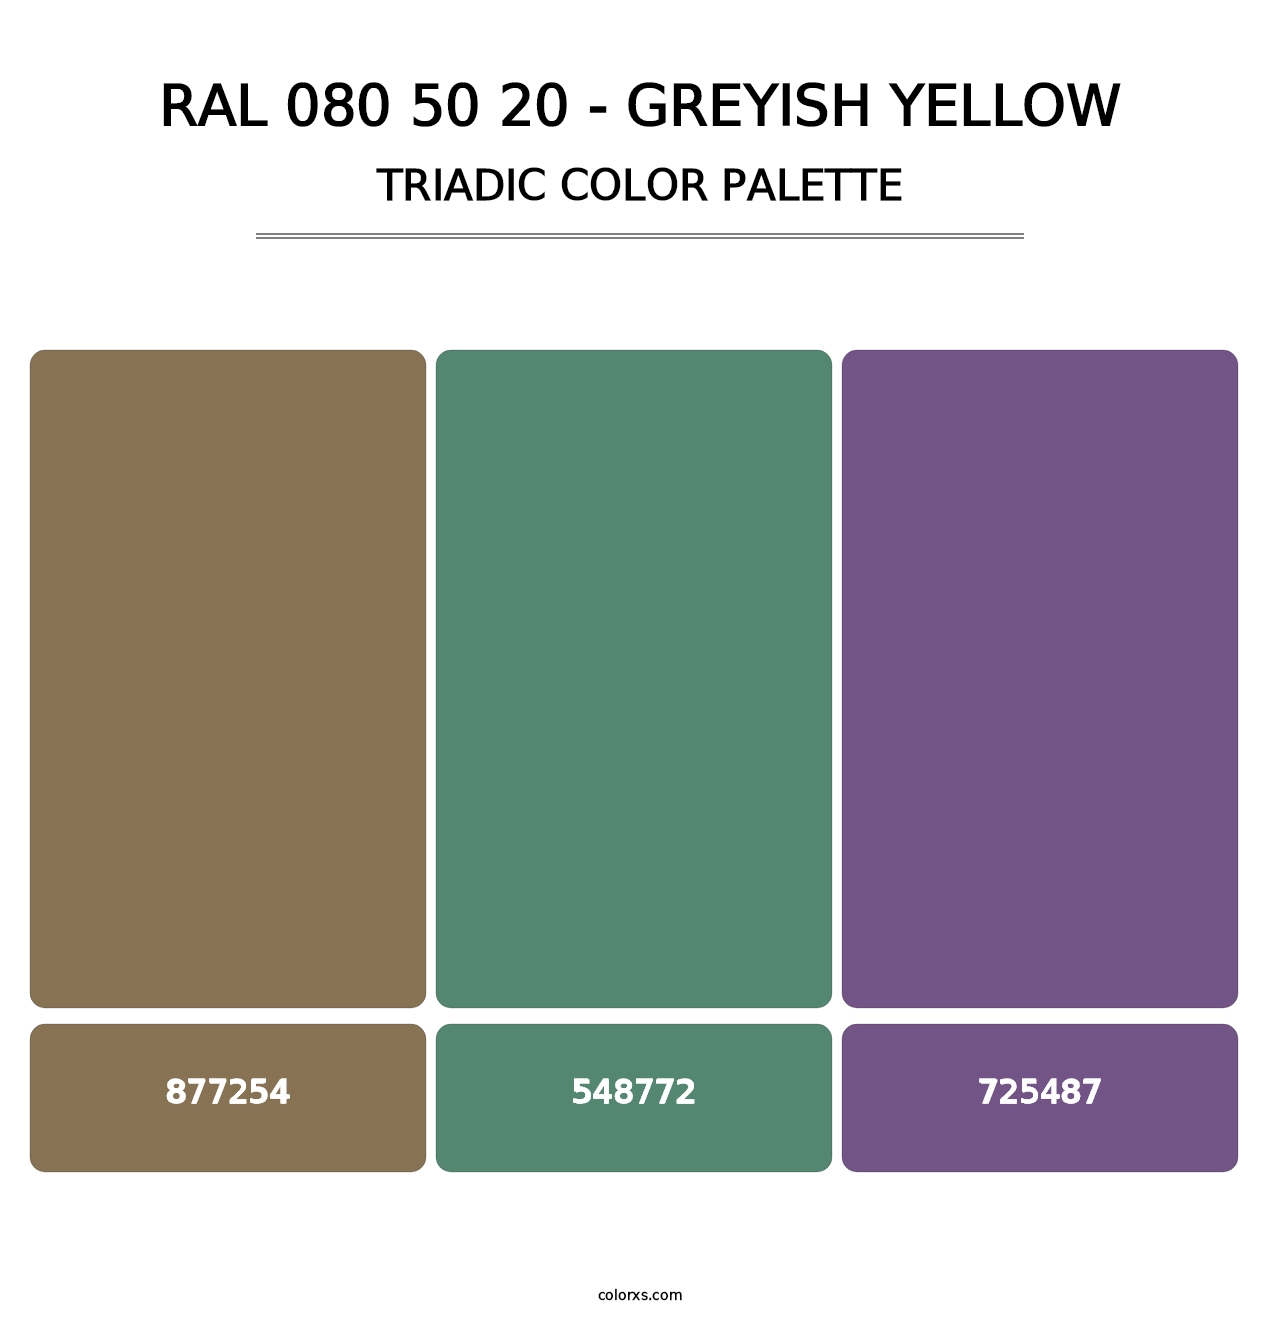 RAL 080 50 20 - Greyish Yellow - Triadic Color Palette